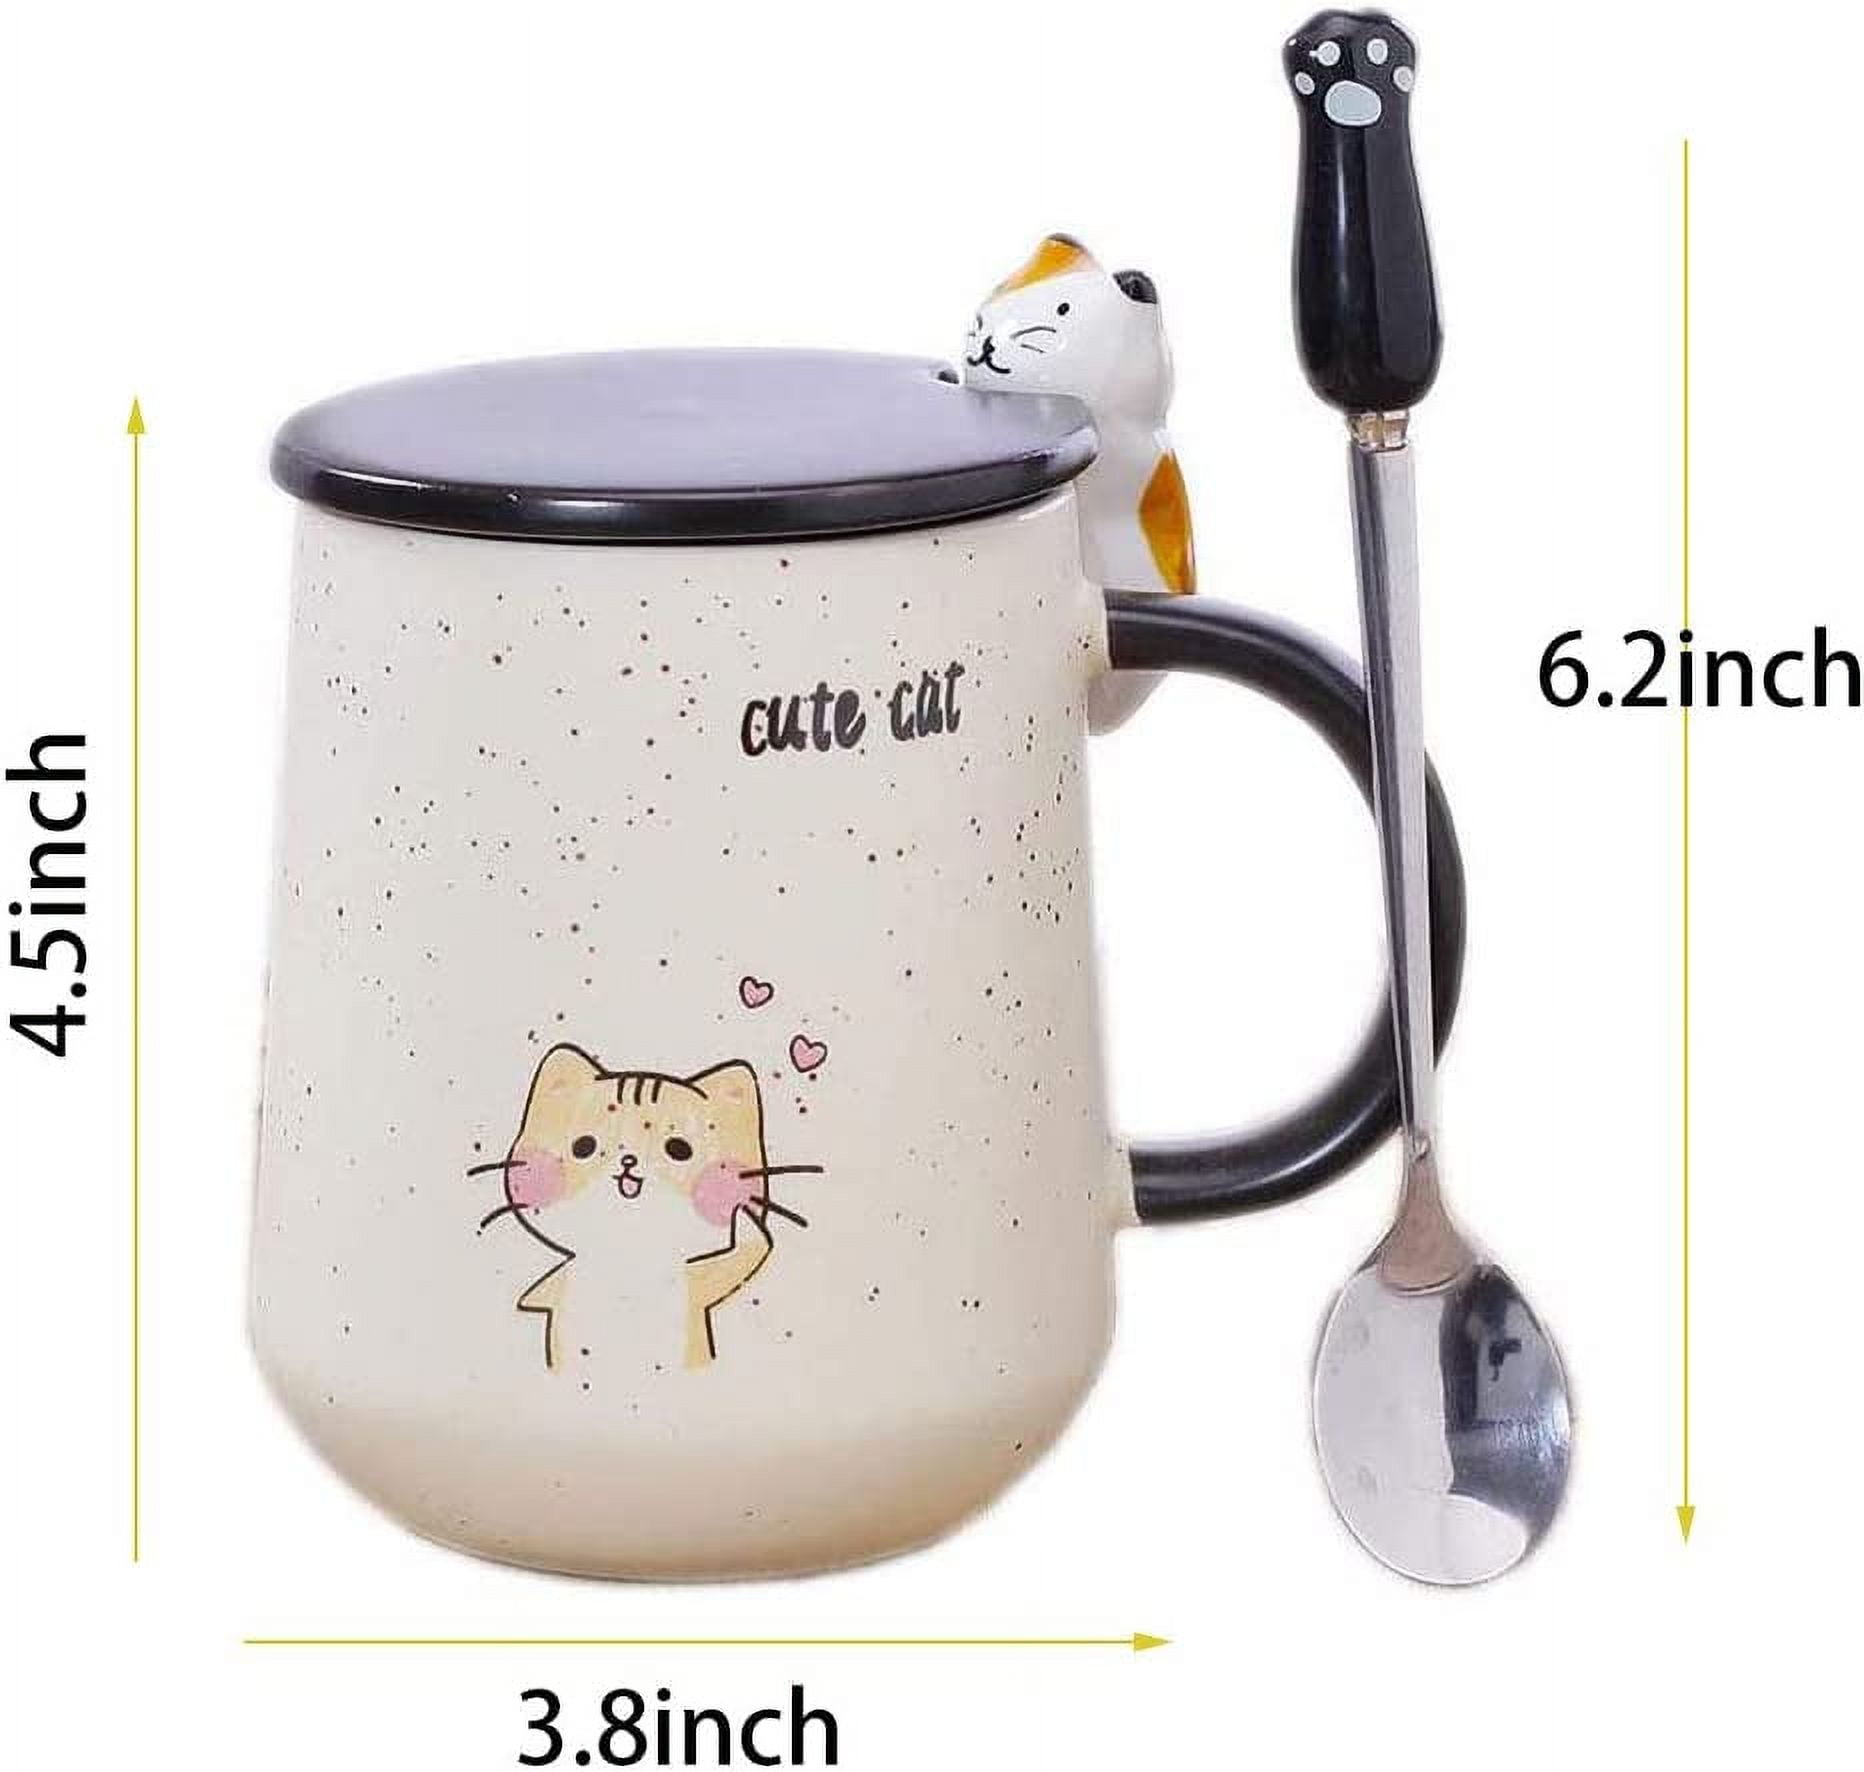 Ceramic Coffee Mug,Cute Cat Handmade Tea Cups, with Lid and Stainless Steel Spoon,Unique Hot Chocolate Novelty Mugs, Christmas, Birthday for Girls